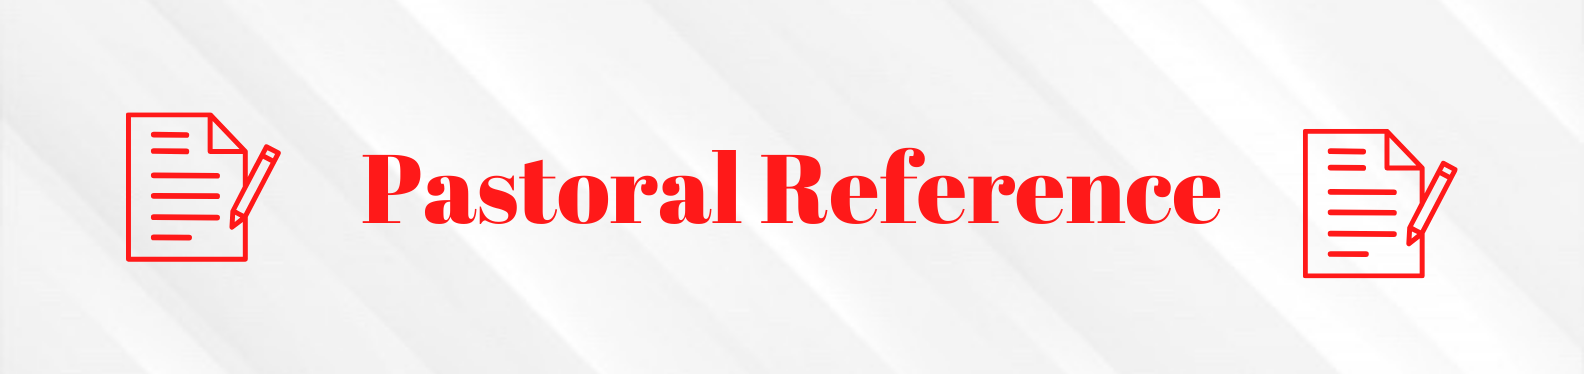 The words "Pastoral Reference" written in red on a white background. With a paper/pen icon in red to the left and right of the words.